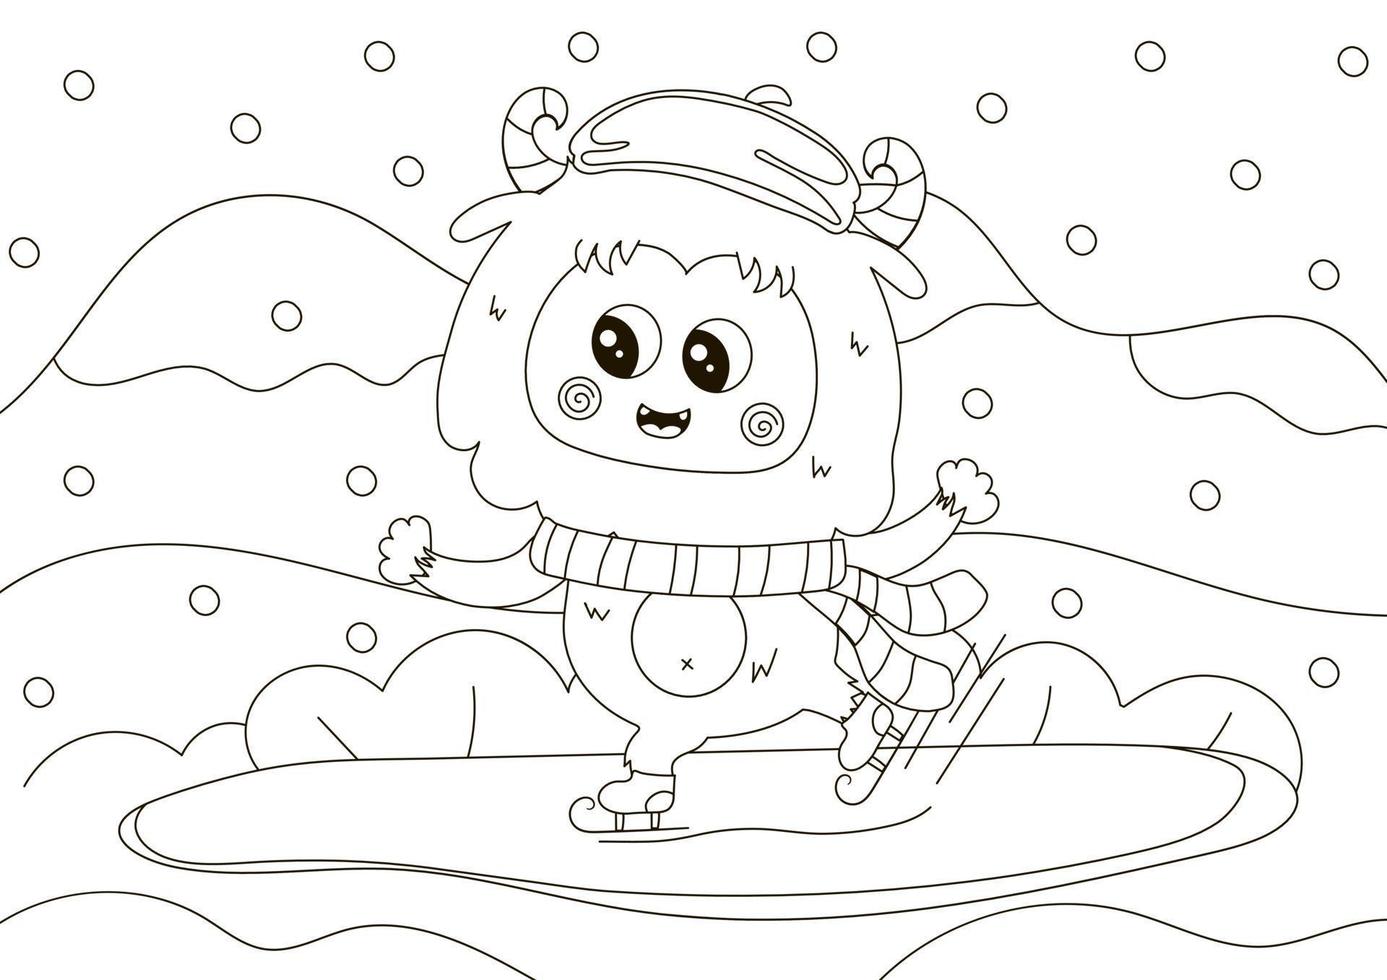 Funny coloring page with cute Yeti character ice skating vector